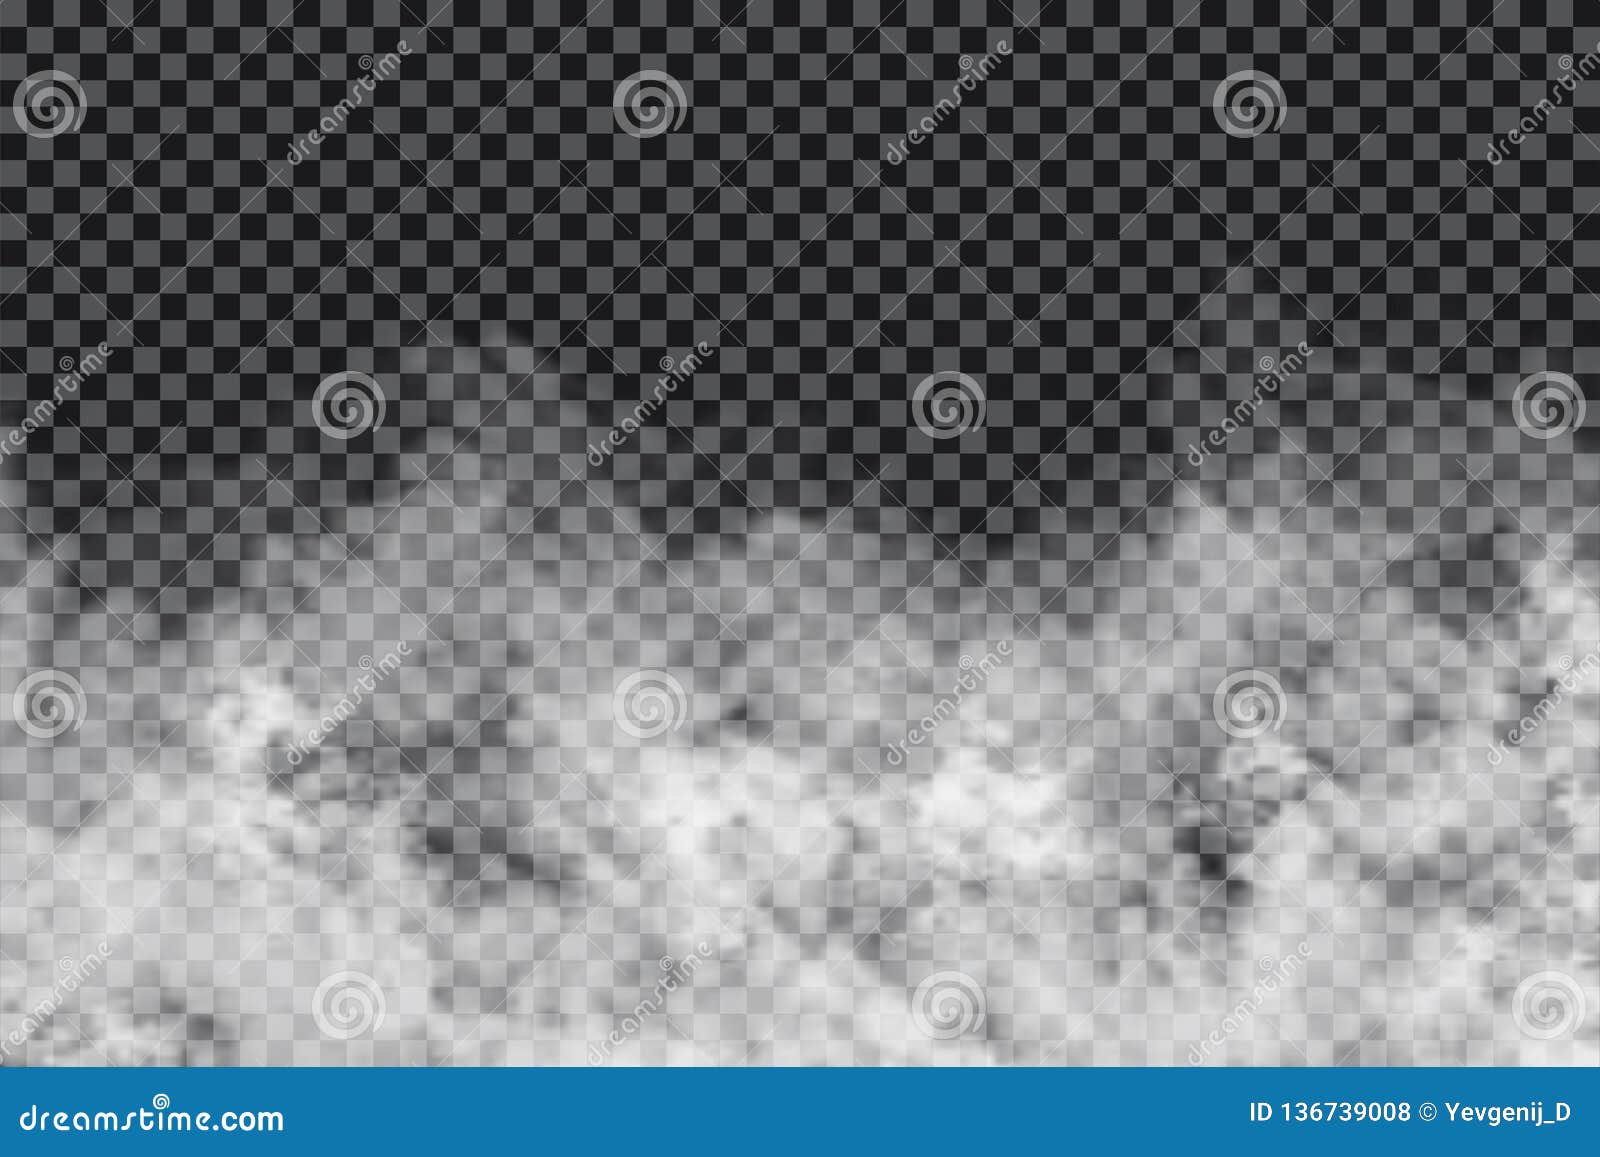 smoke clouds on transparent background. realistic fog or mist texture  on background. transparent smoke effect